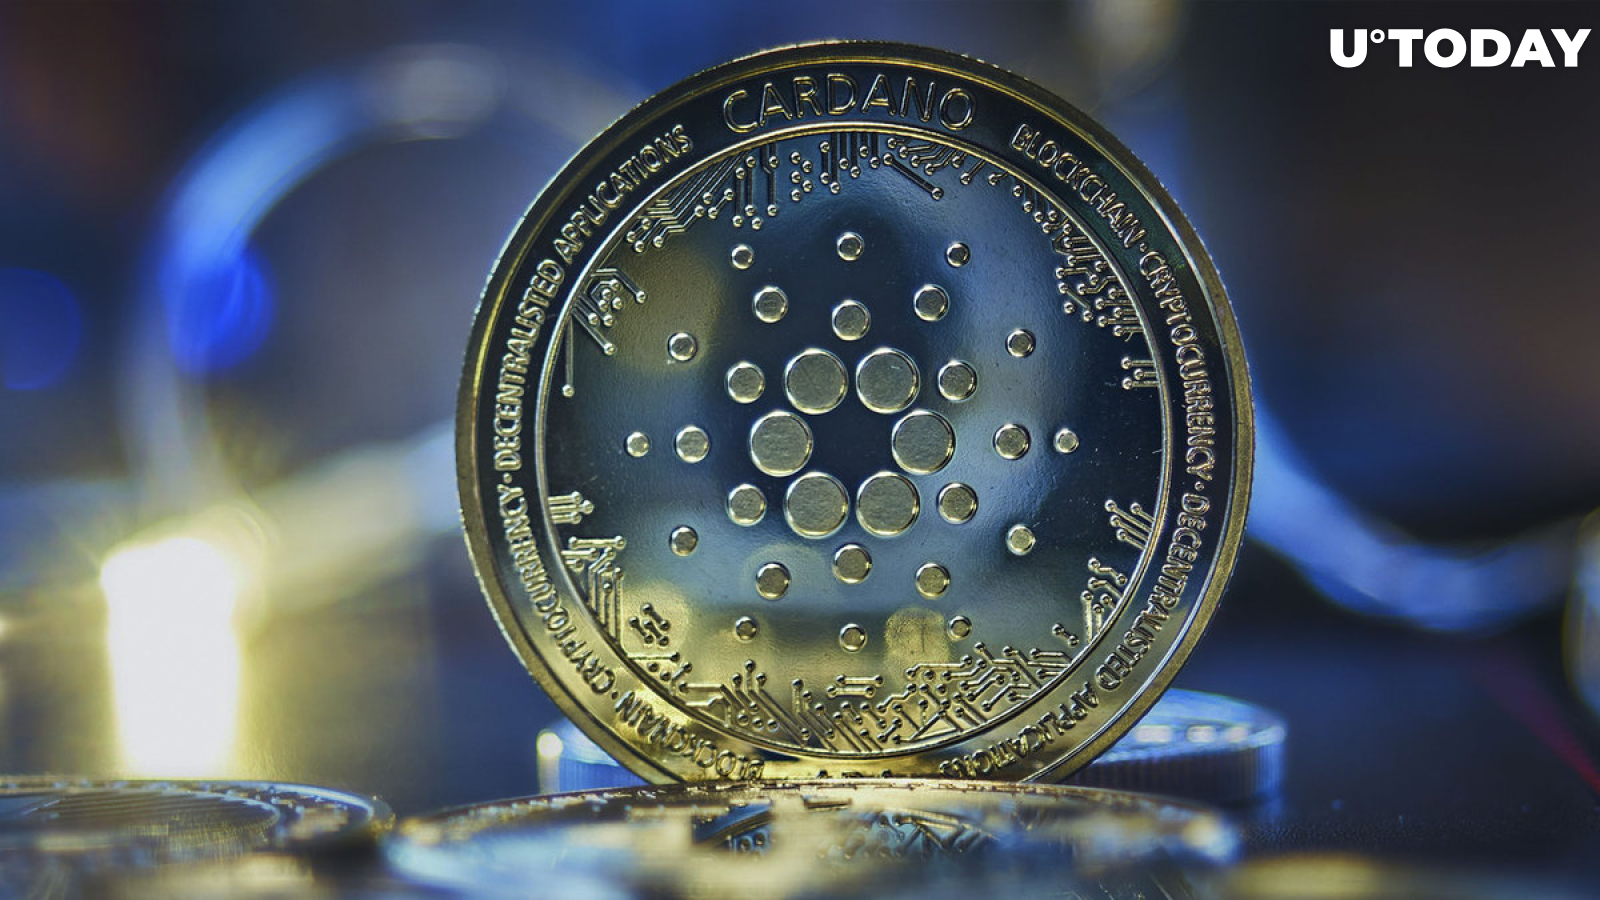 400 Million Cardano (ADA) Tokens Staked Since Early December: Report 